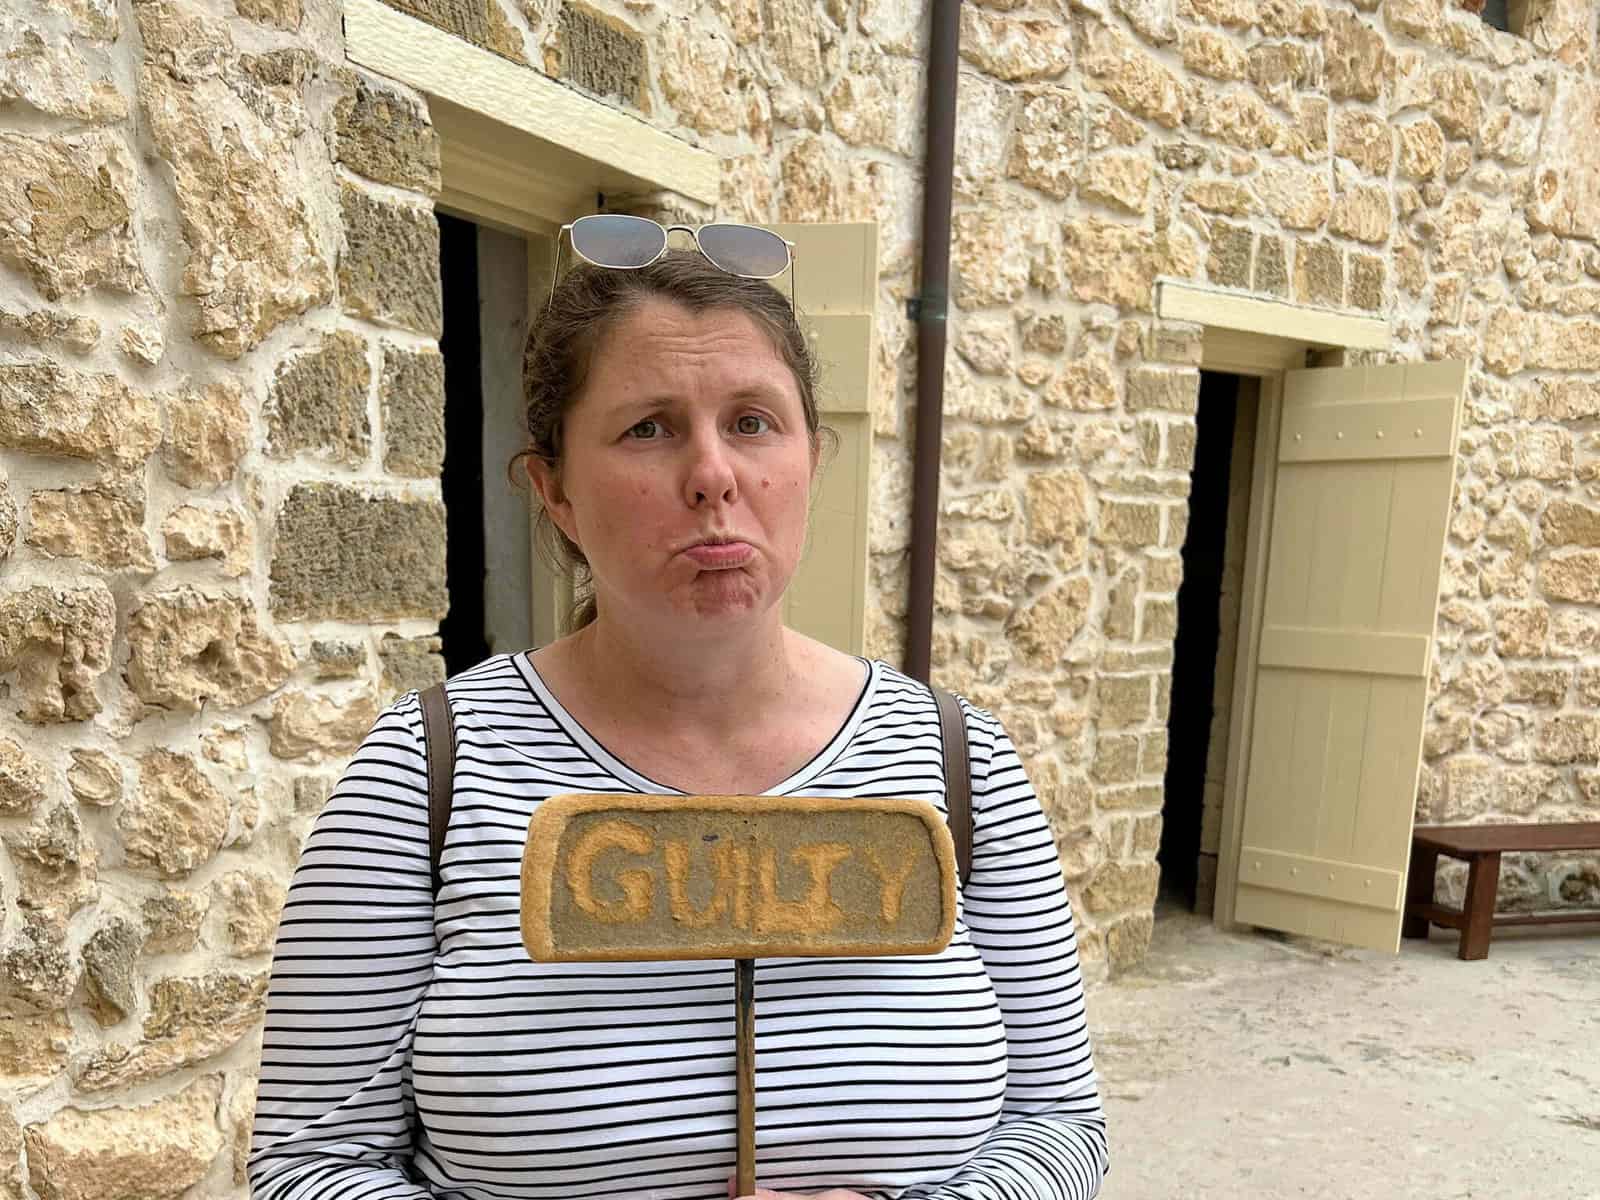 Emma stands in the centre of the Fremantle Round House courtyard holding a sign saying "Guilty". She is making a sad face in jest.